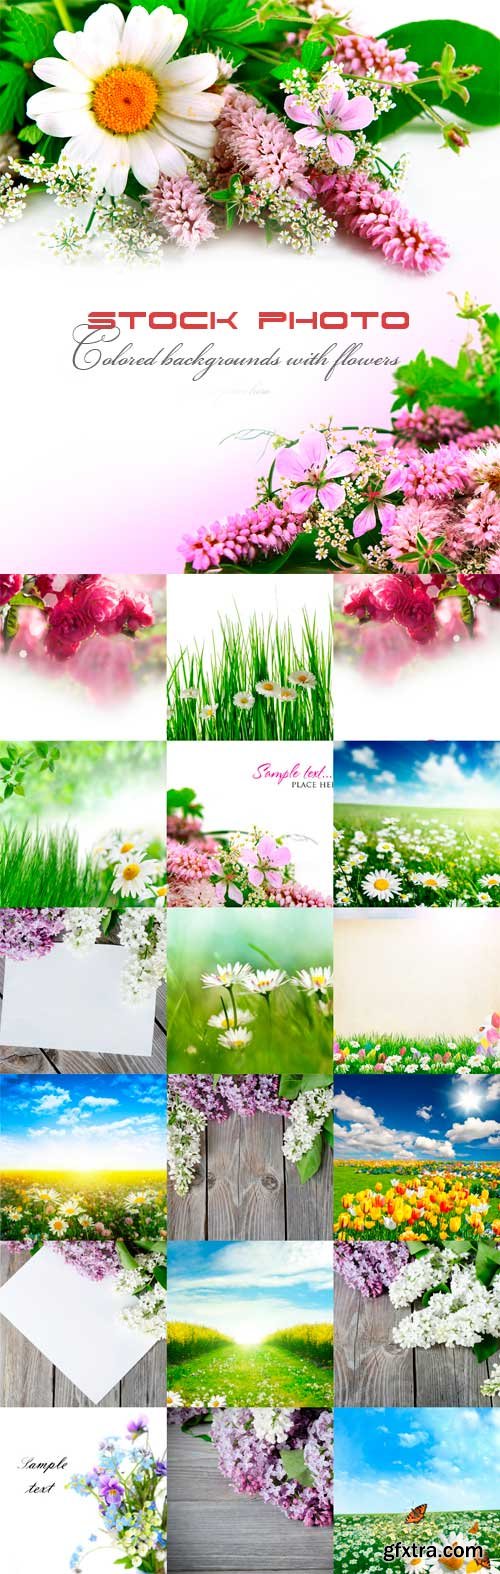 Colored backgrounds with flowers